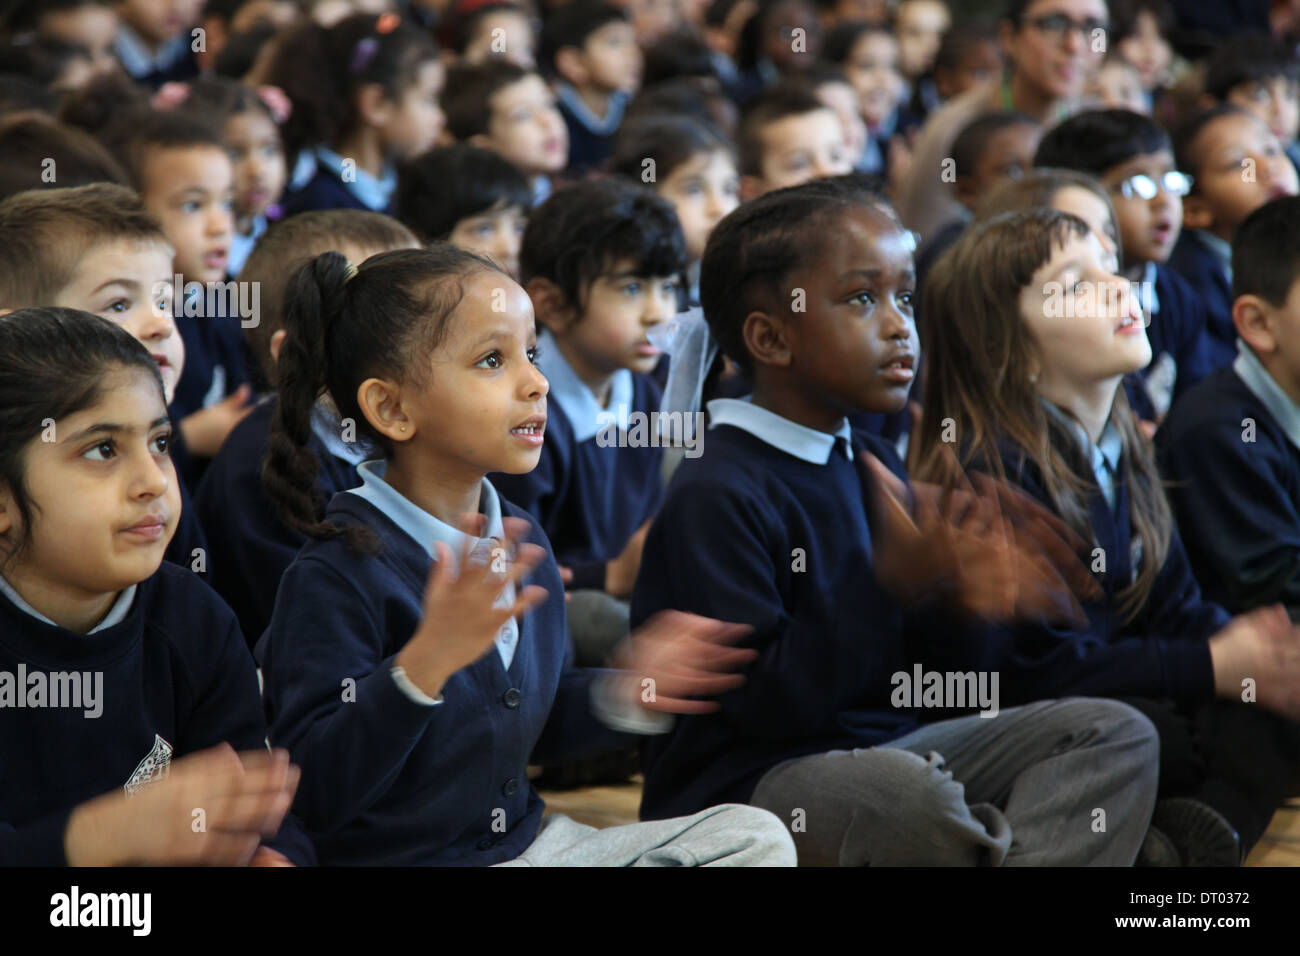 Children at a school assembly singing, clapping and performing actions Stock Photo